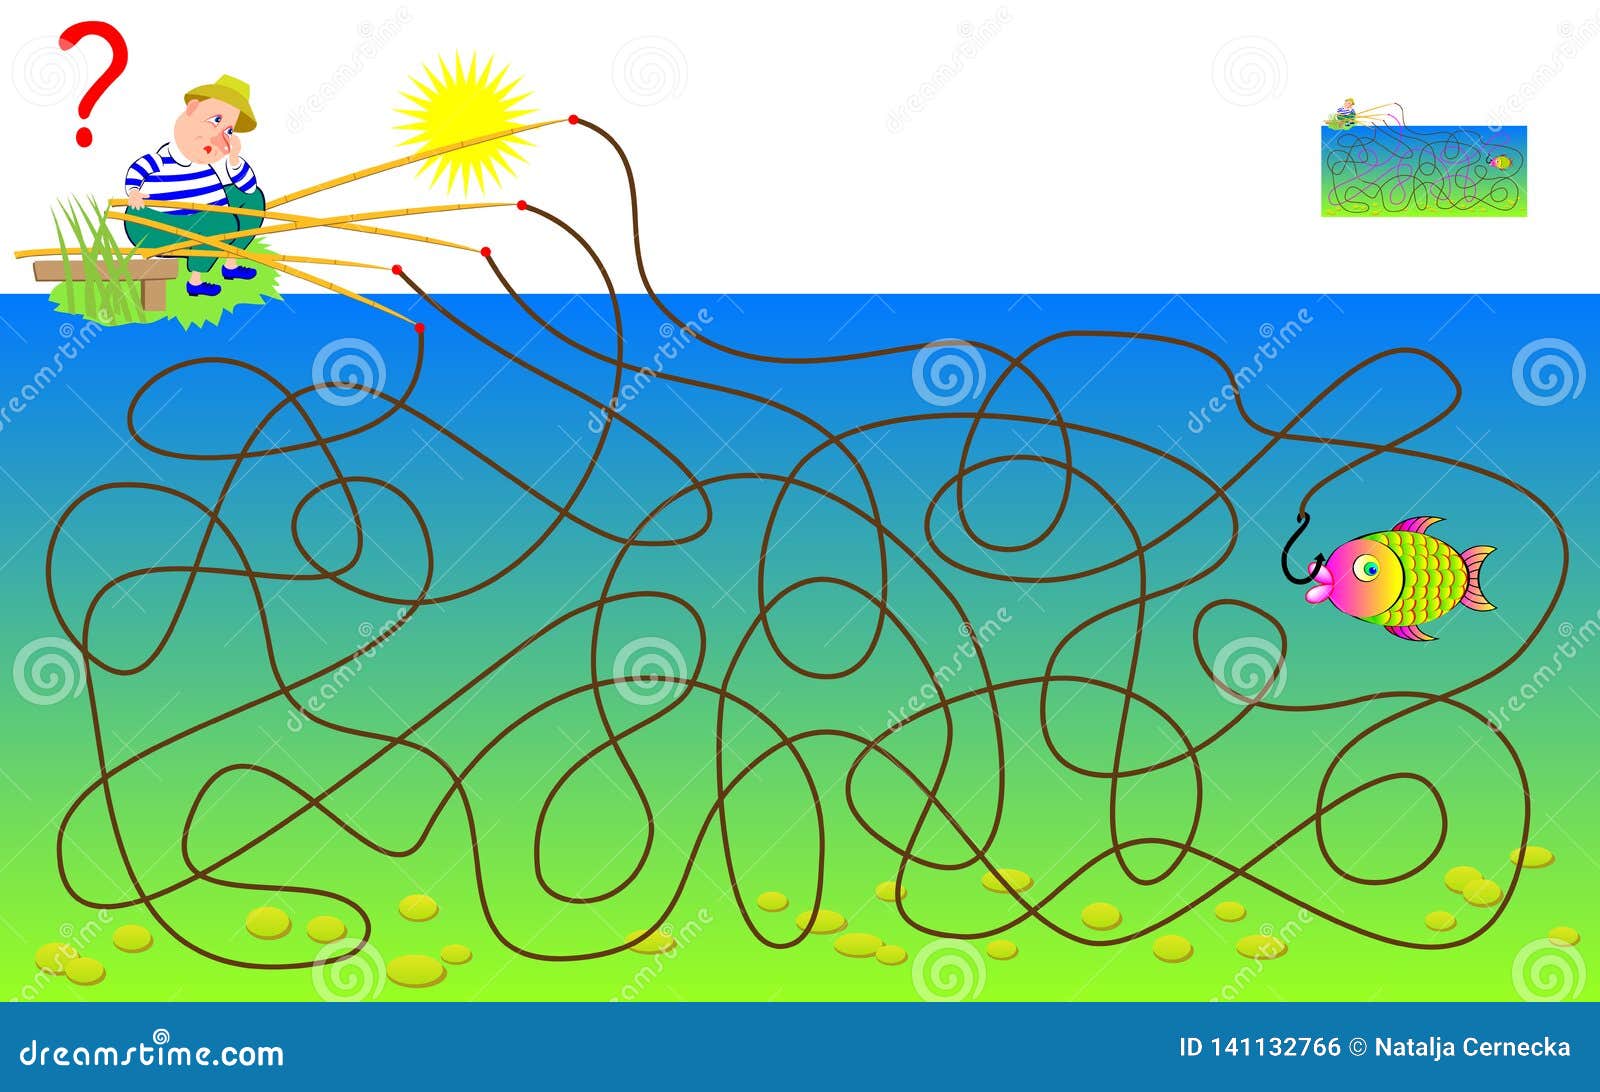 Logic Puzzle Game with Labyrinth for Children and Adults. Find by Which  Fishing Rod Fisherman Has Caught the Fish. Stock Vector - Illustration of  direction, fish: 141132766